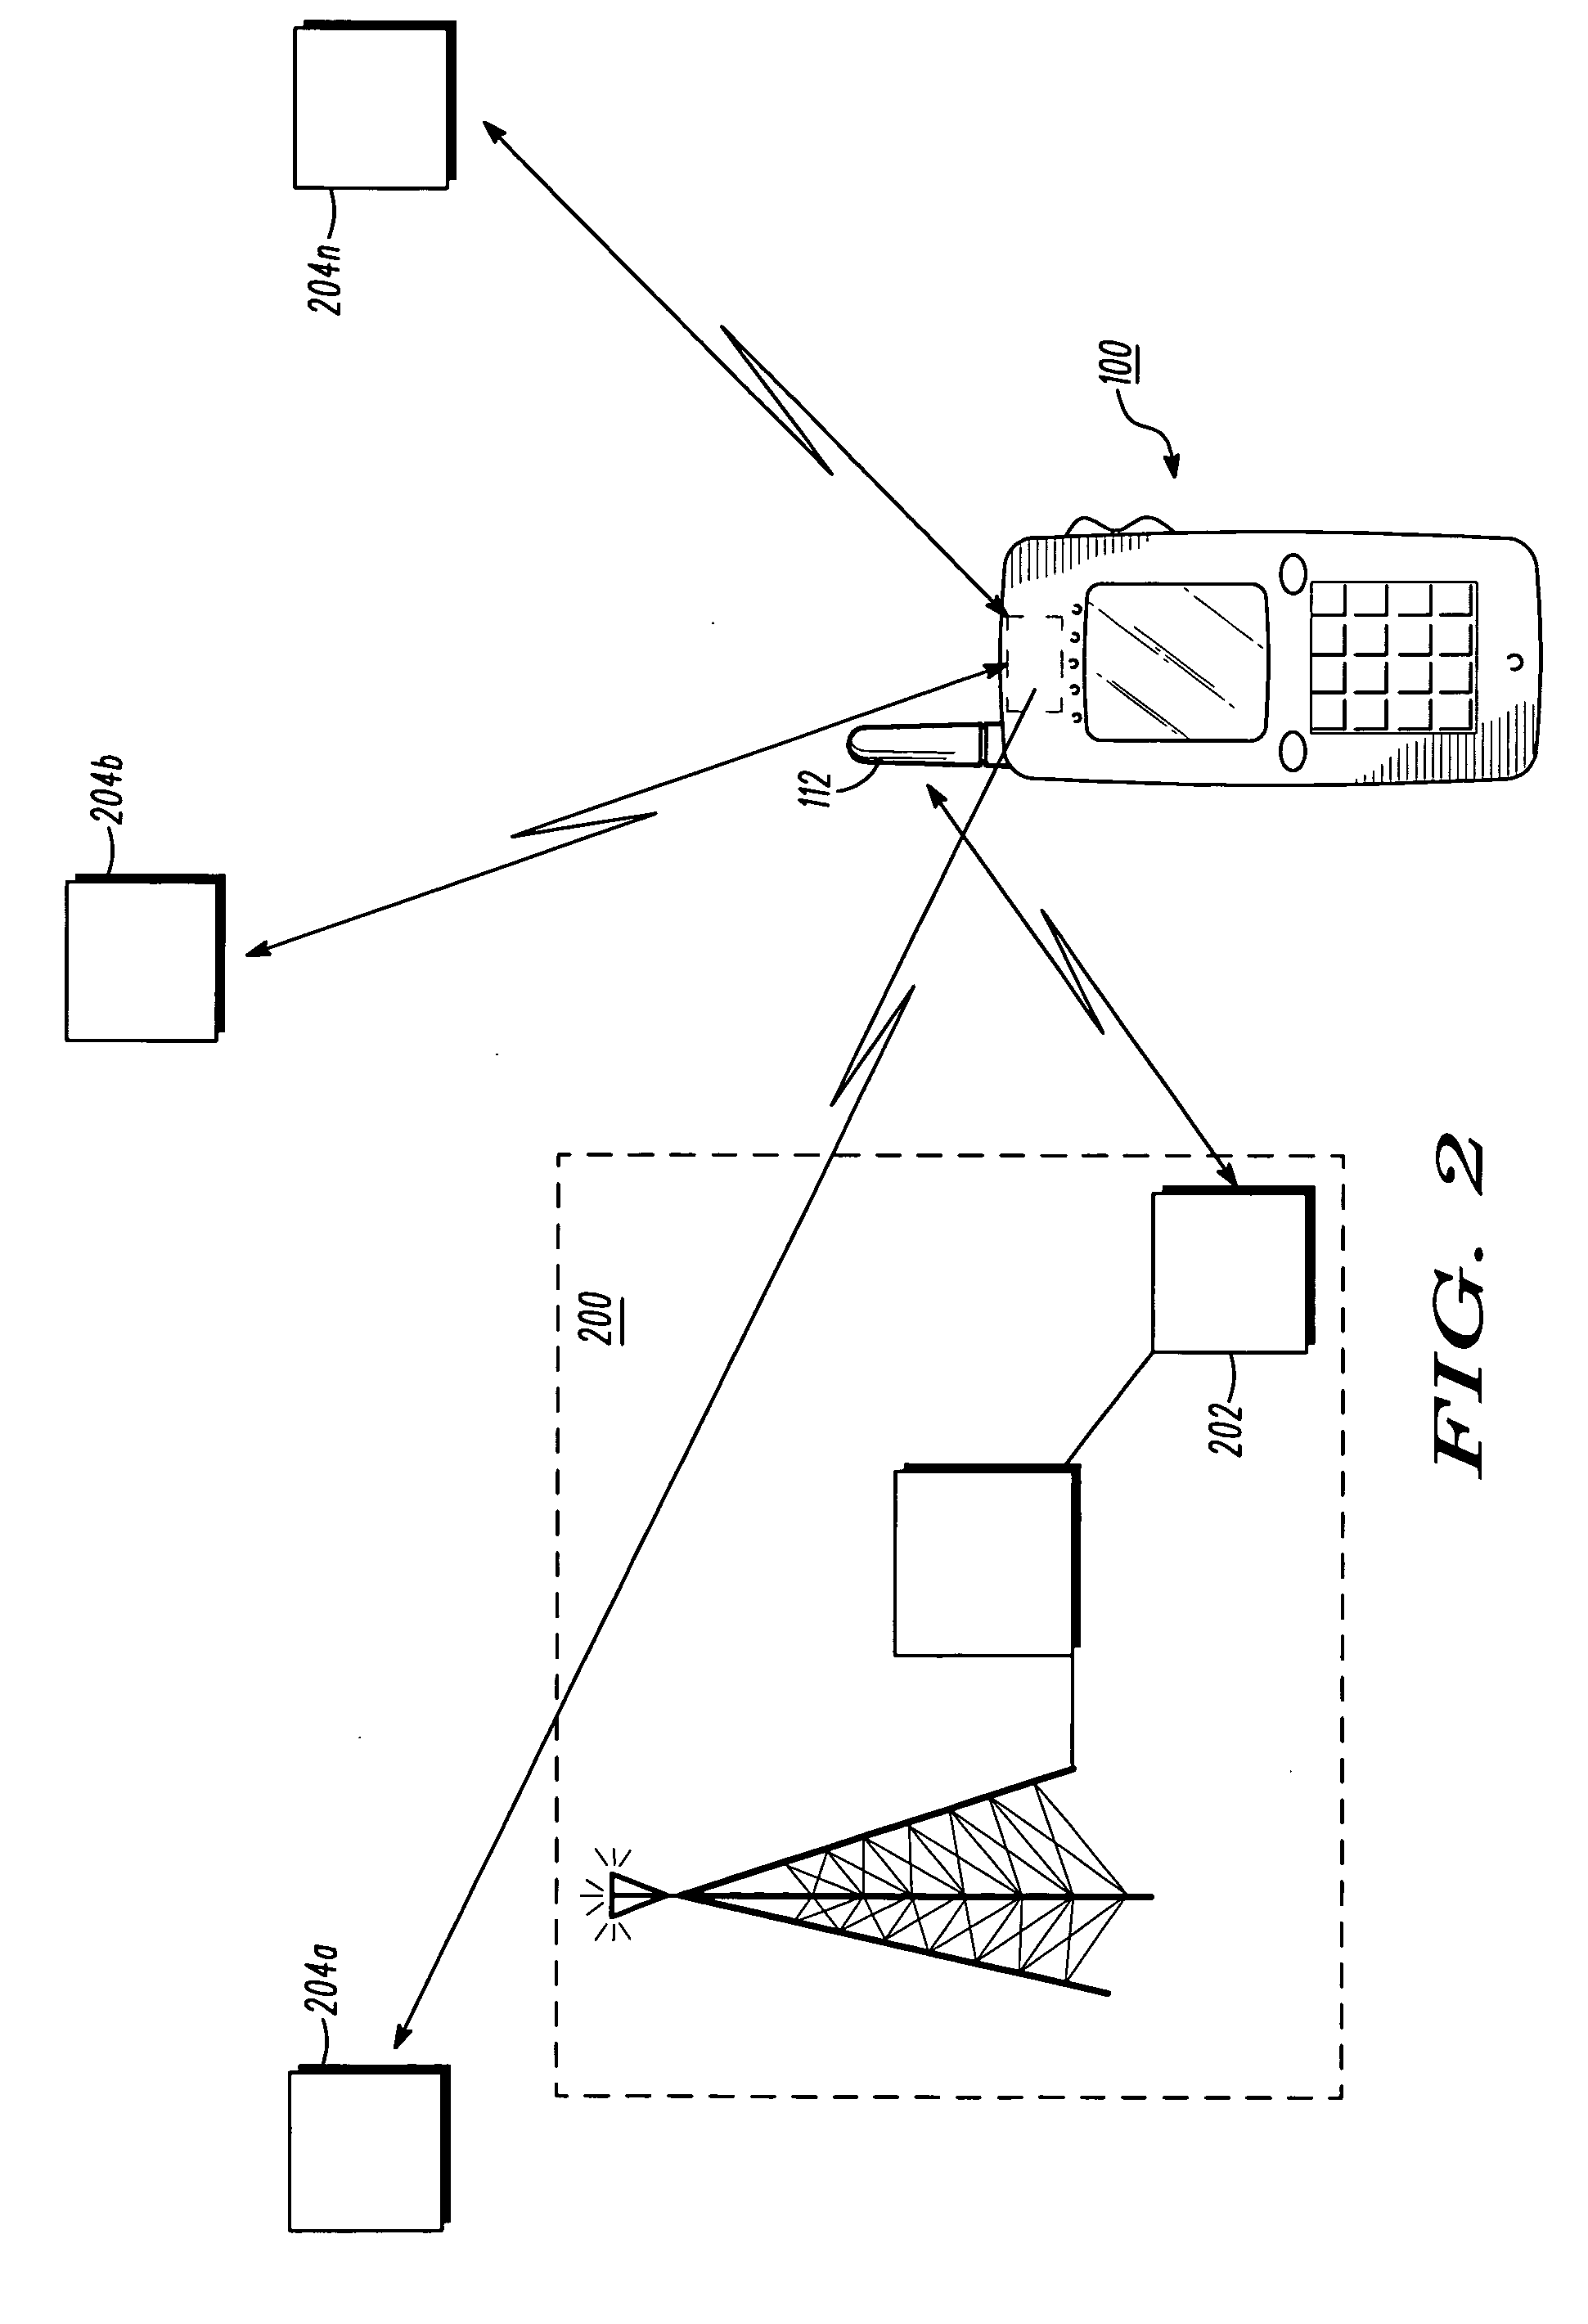 Dynamic pre-selector for a GPS receiver